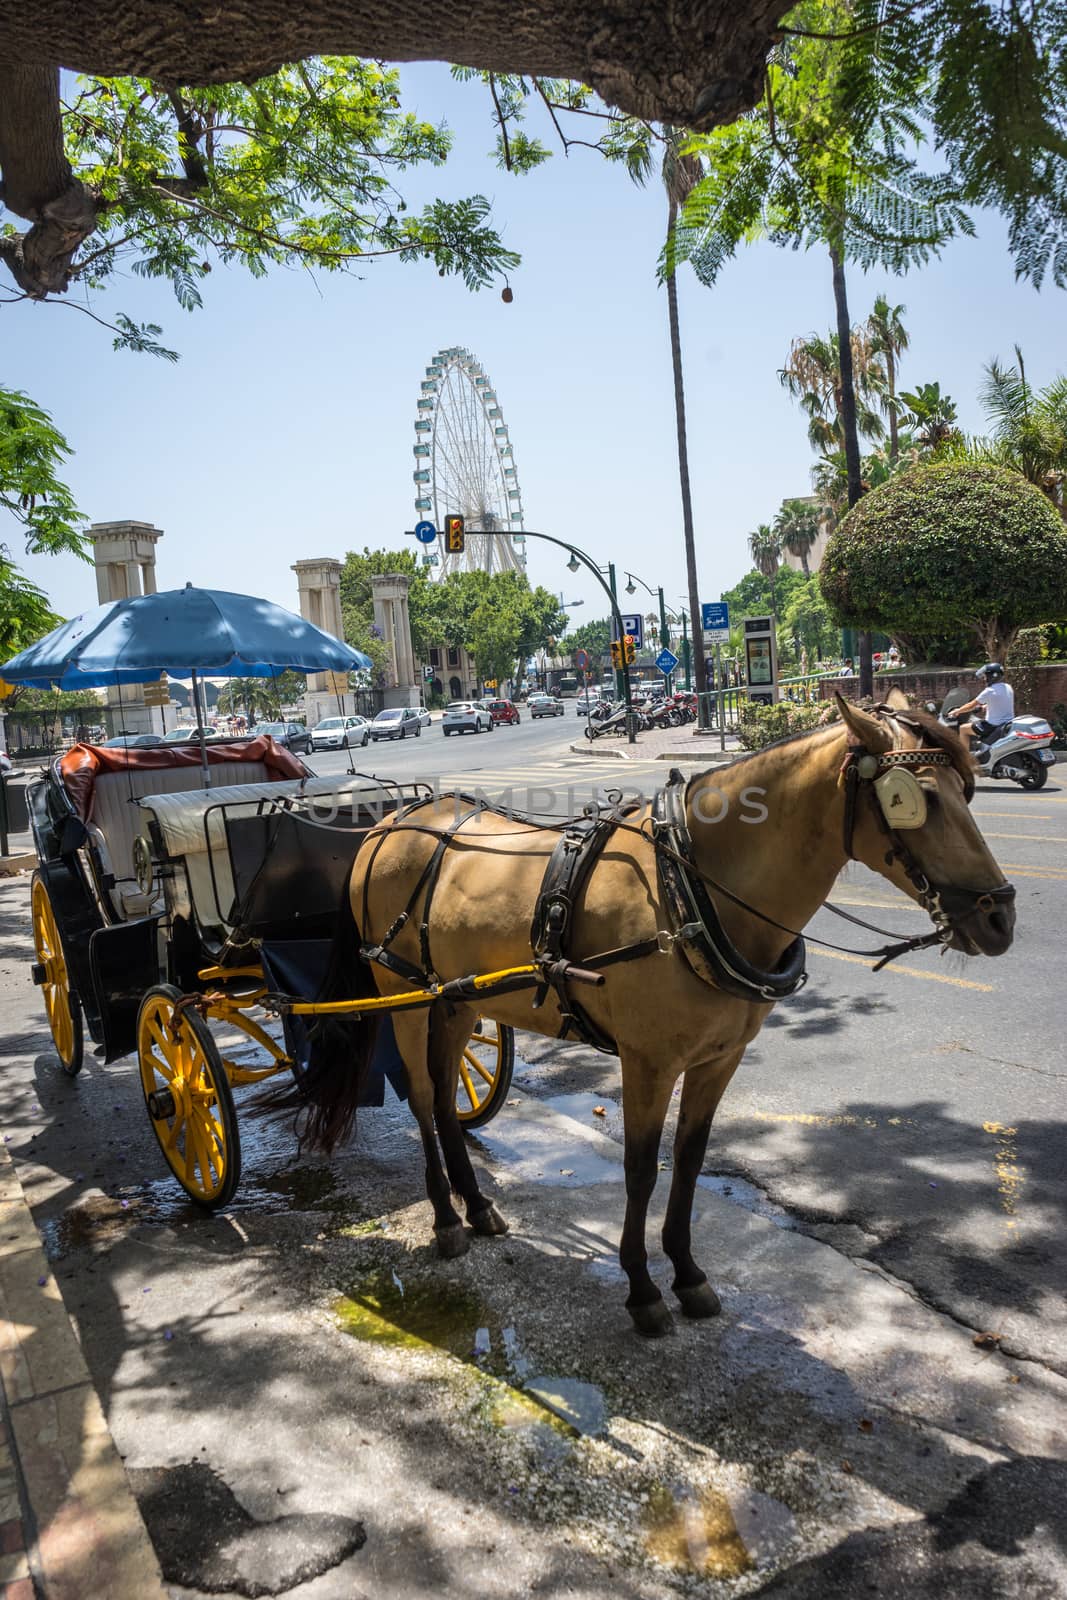 A horse drawn carriage in front of a giant wheel at Malaga, Spai by ramana16